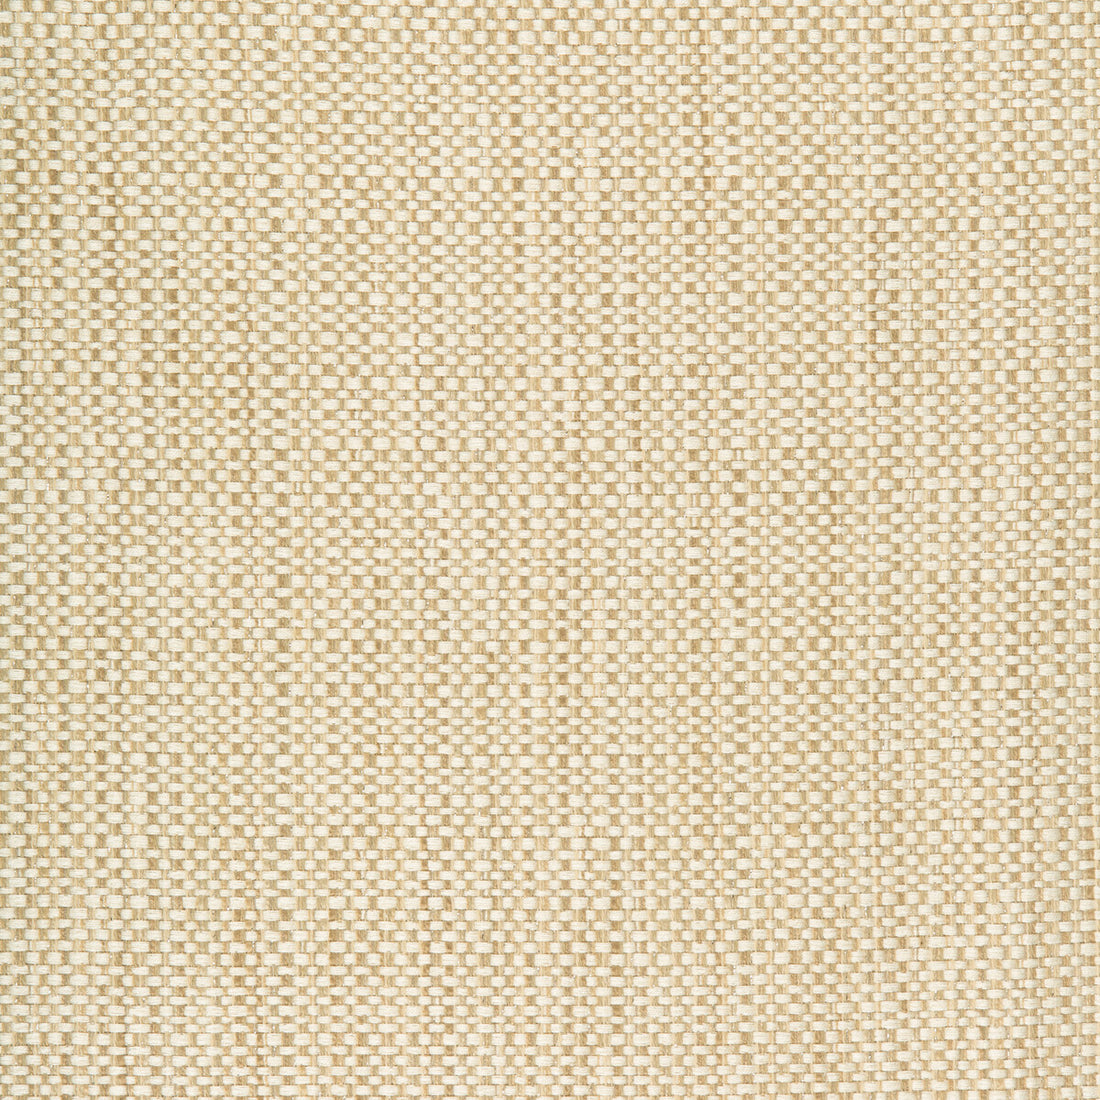 Kravet Design fabric in 34683-416 color - pattern 34683.416.0 - by Kravet Design in the Performance Crypton Home collection